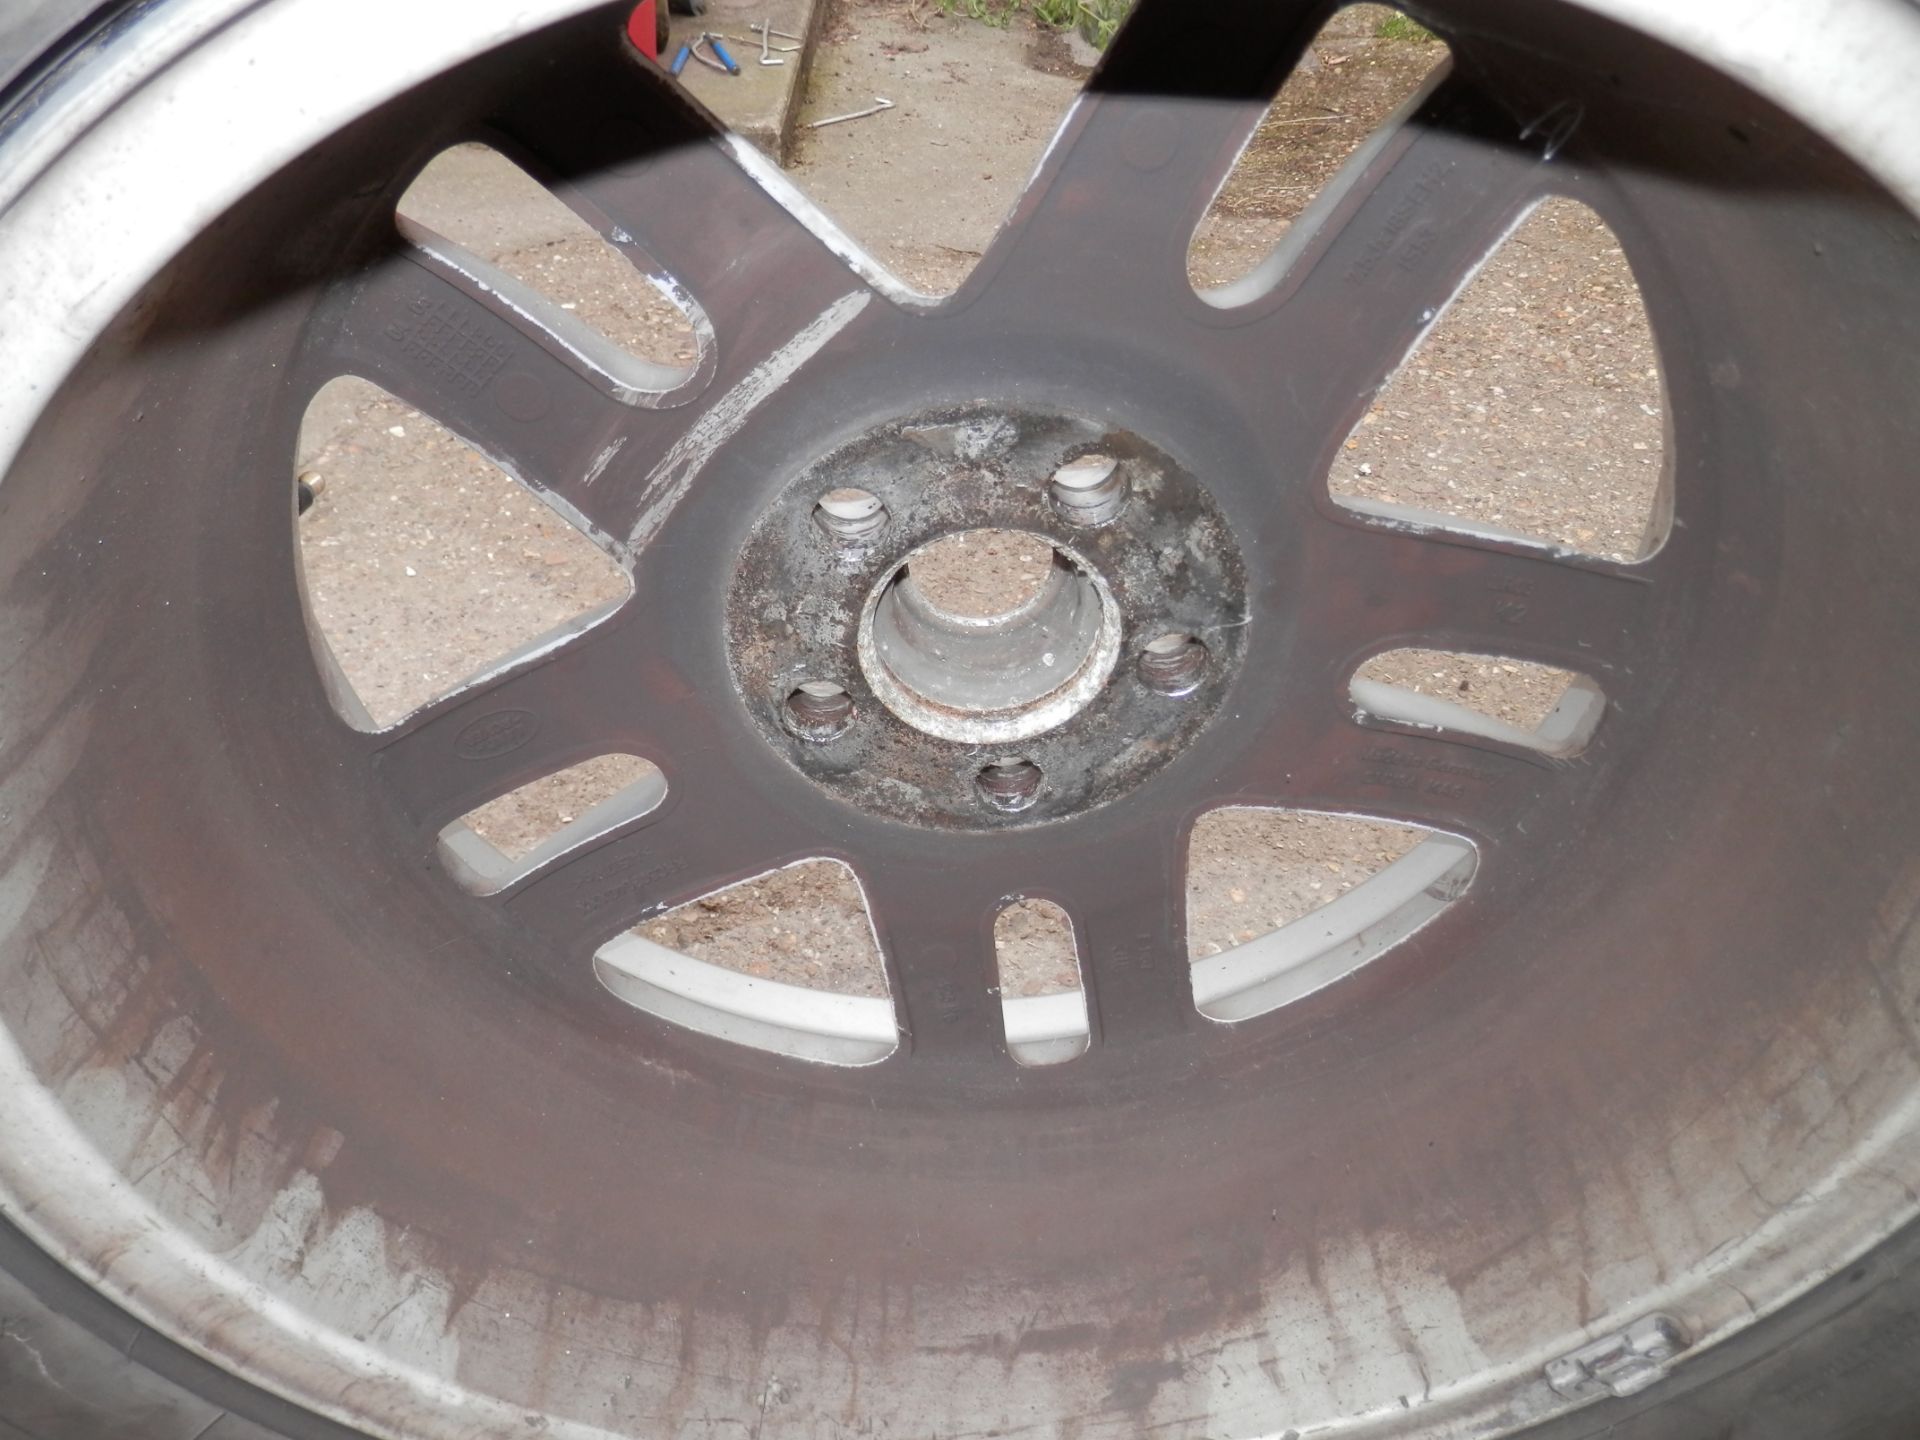 1 X RANGE ROVER VOGUE TD6 18" WHEEL & DECENT GOODYEAR TYRE. 255/60/18. FROM A 2004 CAR. FITS OTHERS - Image 3 of 5